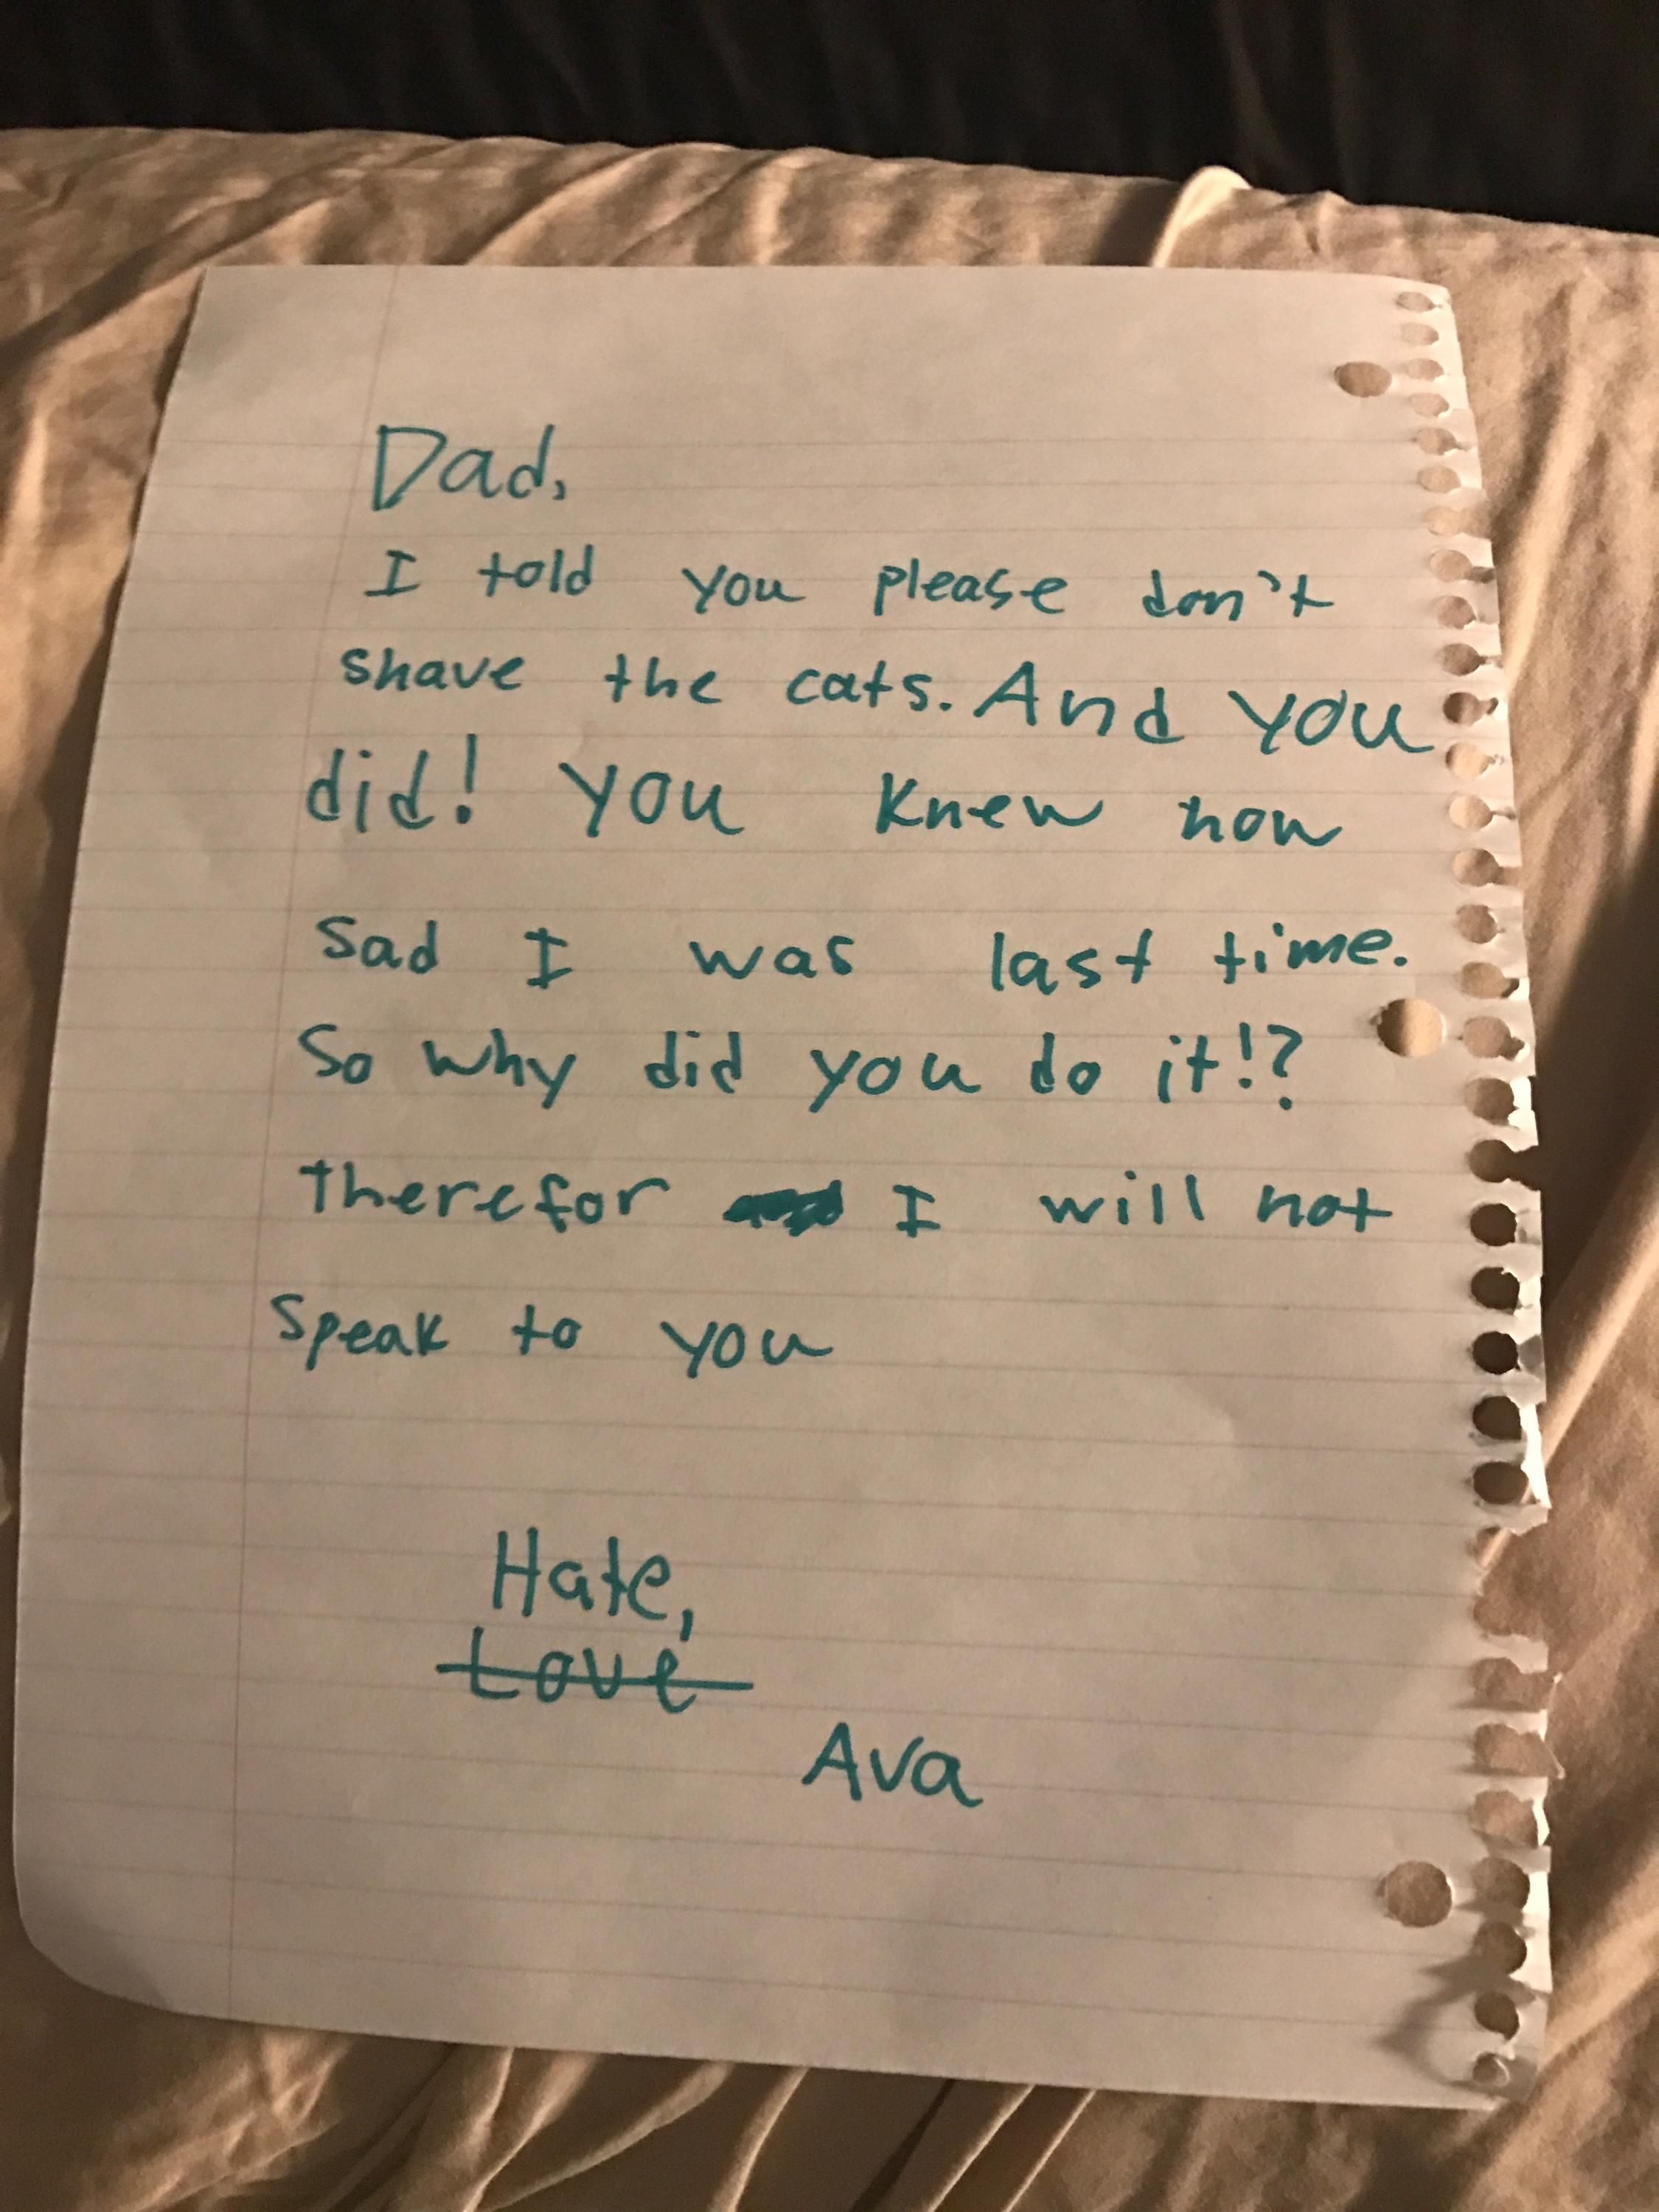 Note that my co-workers daughter wrote to him